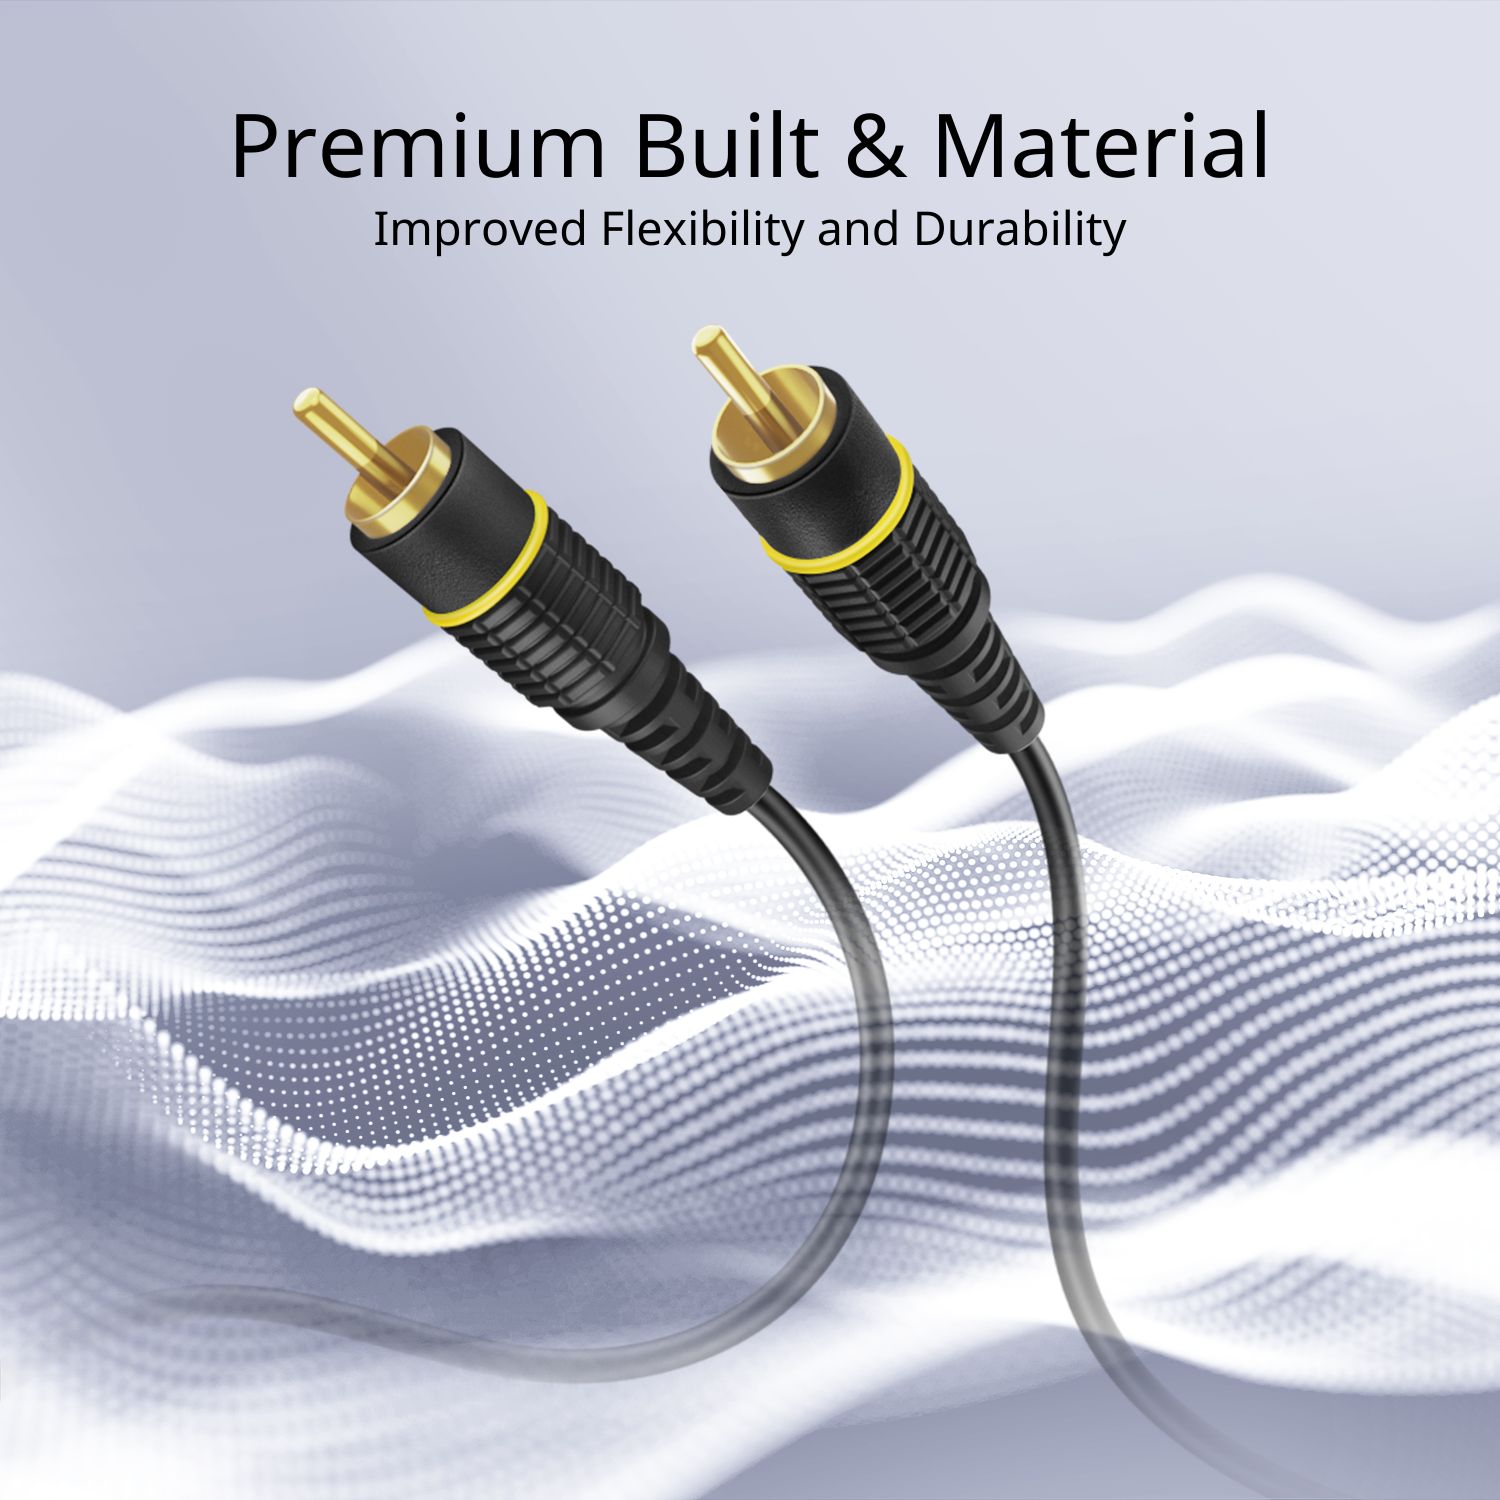 Subwoofer S/PDIF Audio Digital Coaxial RCA Composite Video Cable (3 Feet) - Gold Plated Dual Shielded RCA to RCA Male Connectors - Black - image 3 of 6